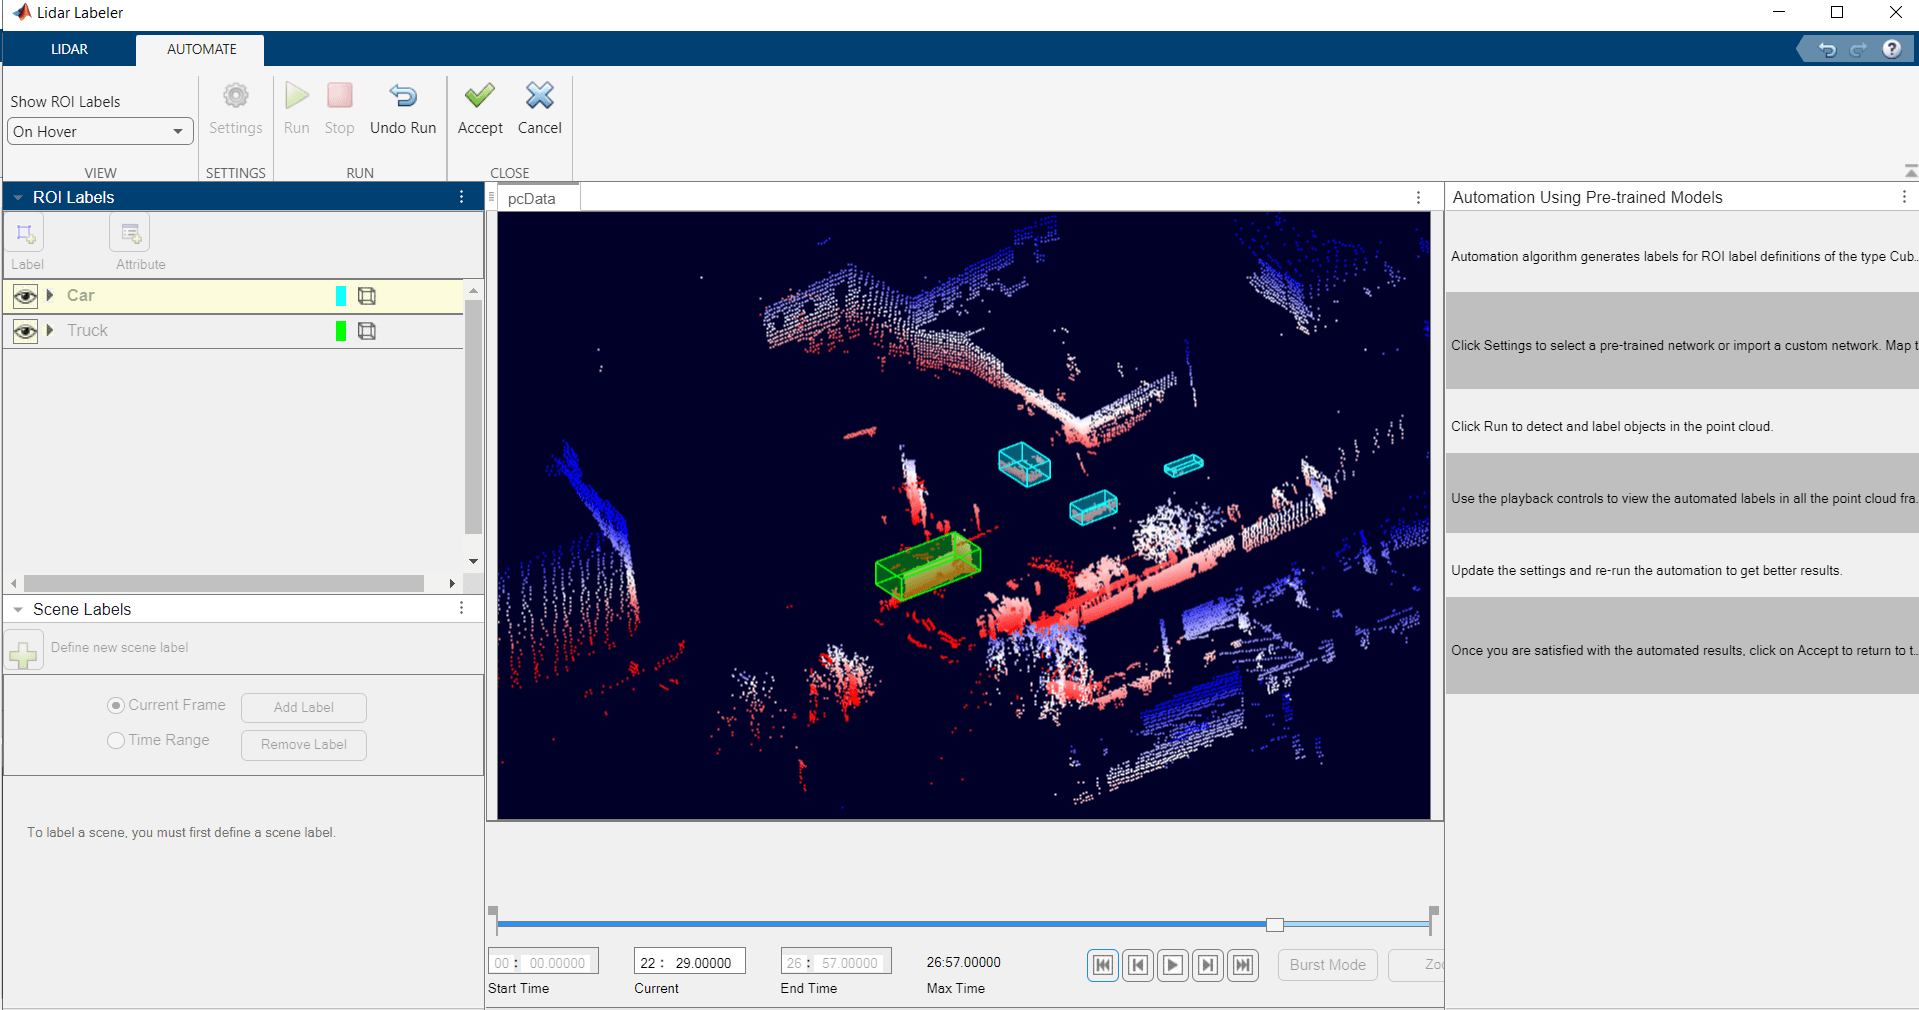 Automate Ground Truth Labeling for Point Cloud Using Pretrained Deep Learning Model